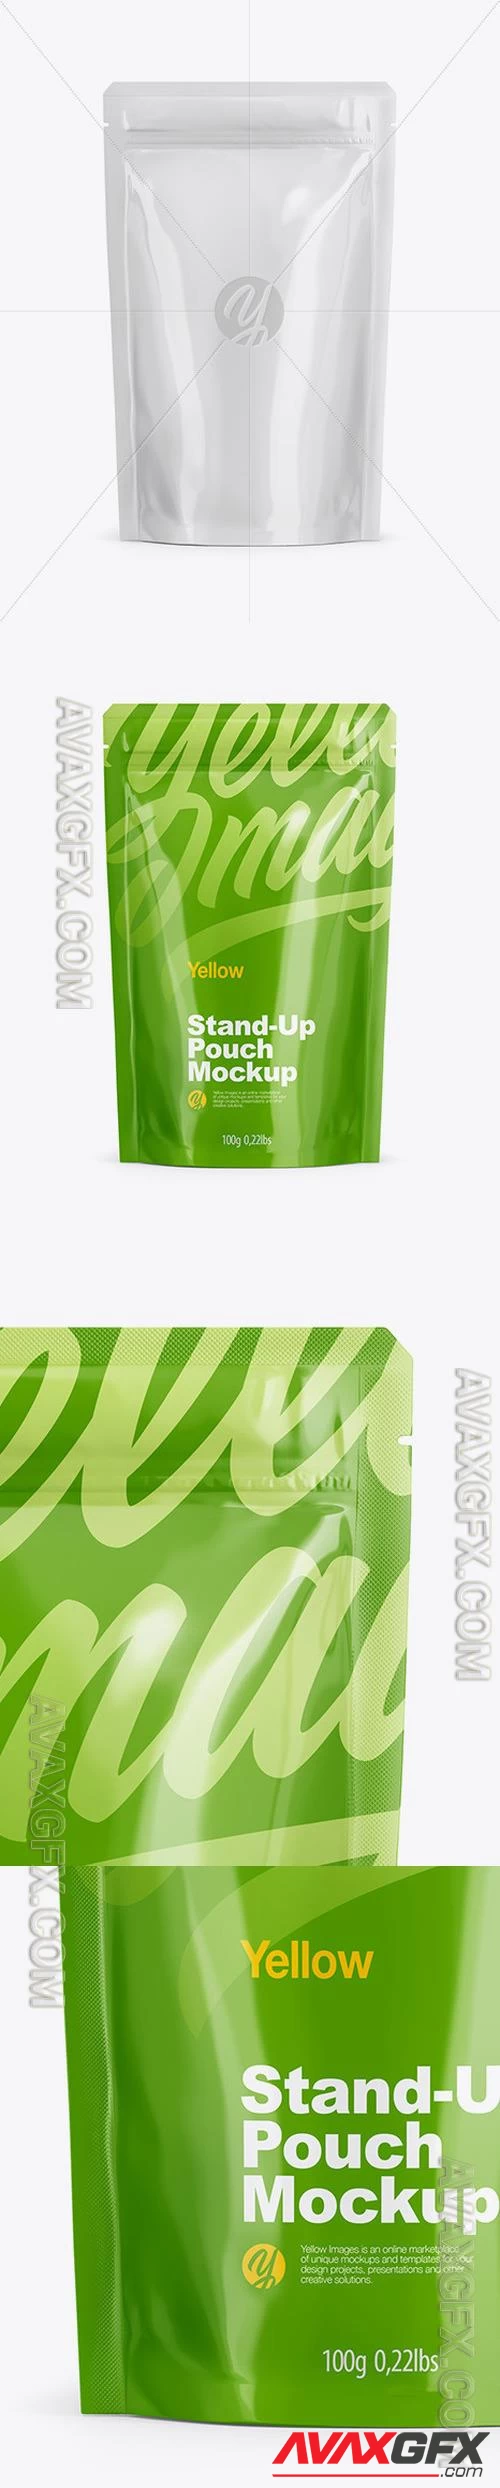 Glossy Stand Up Pouch with Zipper Mockup - Front View 50535